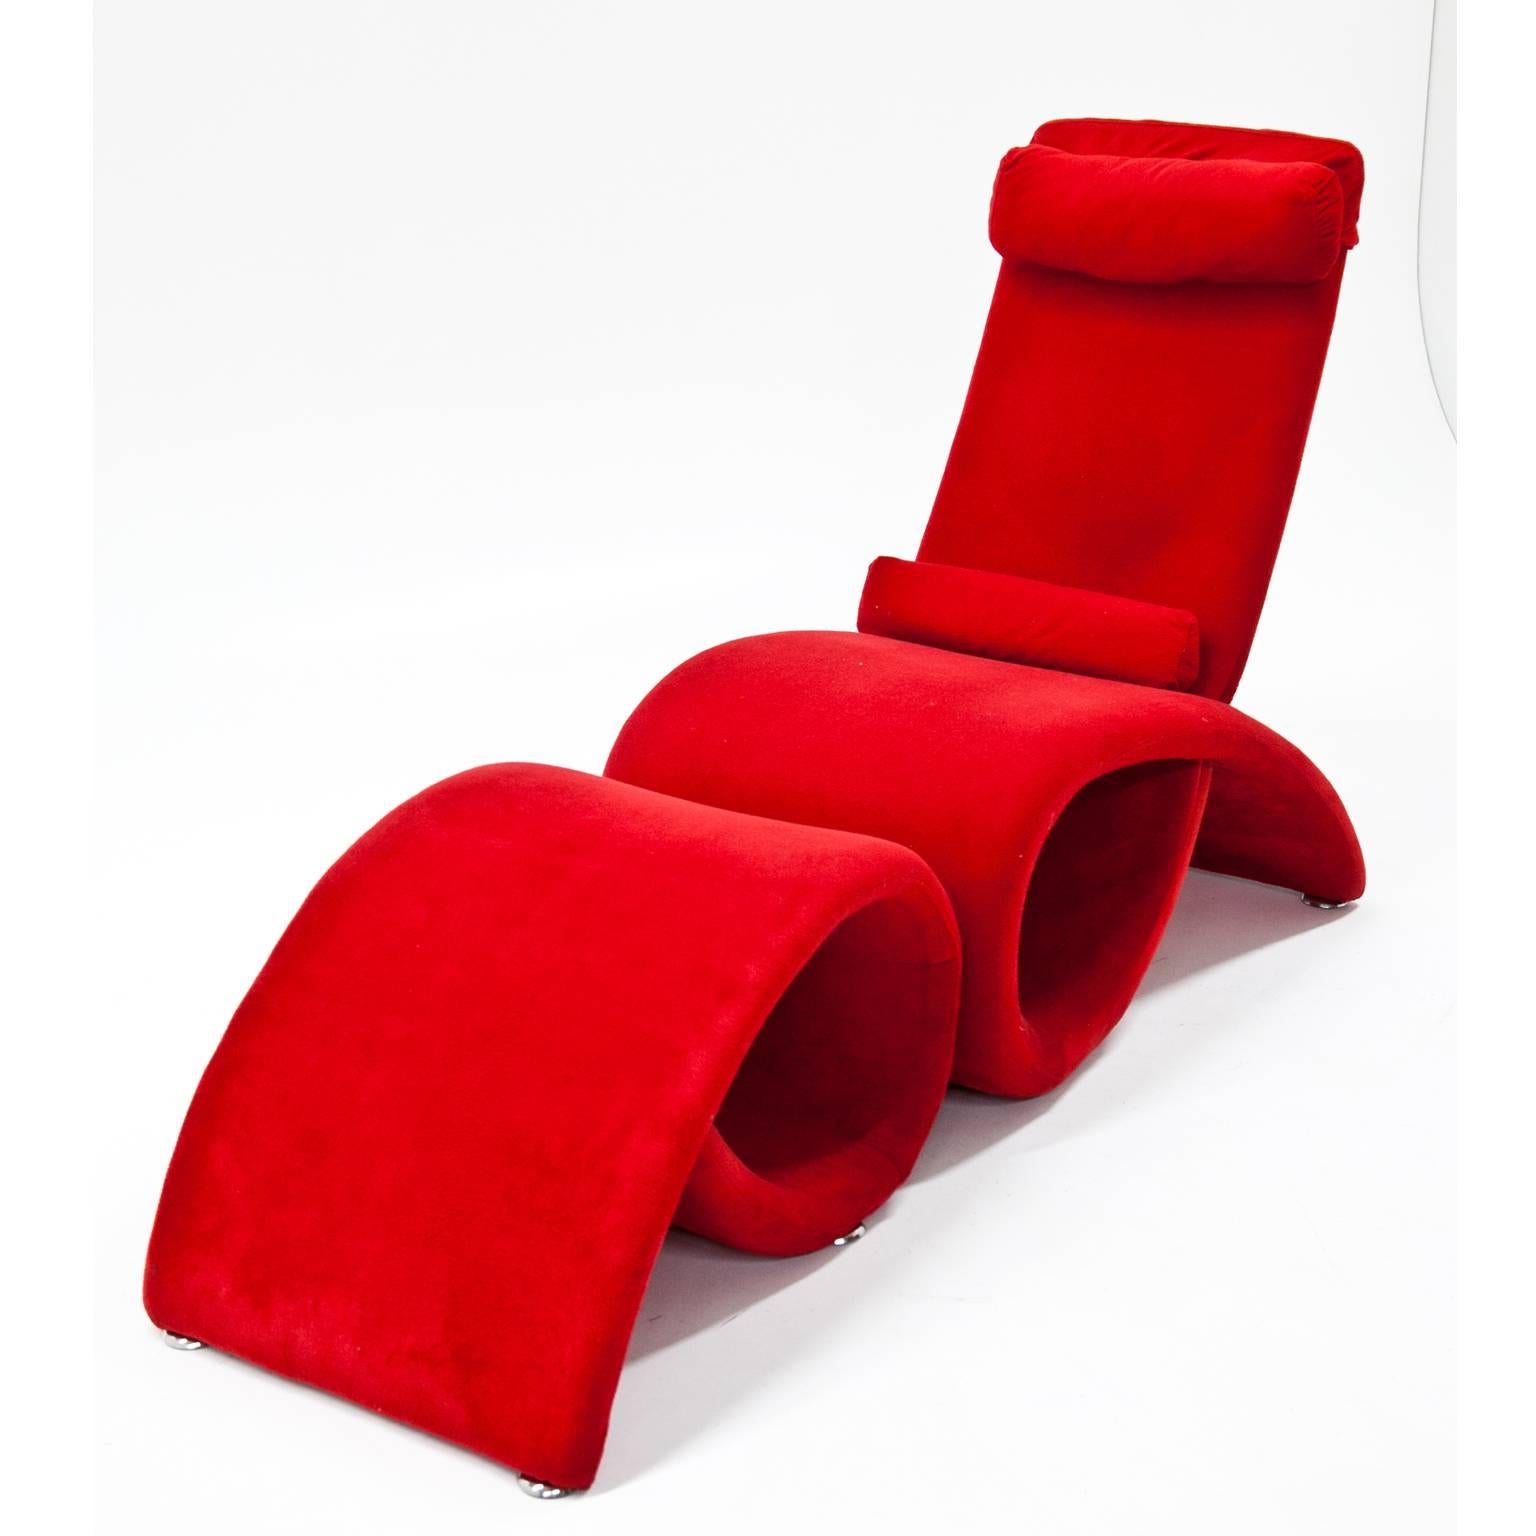 Two-part lounge chair with footstool in an unusual curved shape. Chair and footrest are upholstered with a red velour fabric.